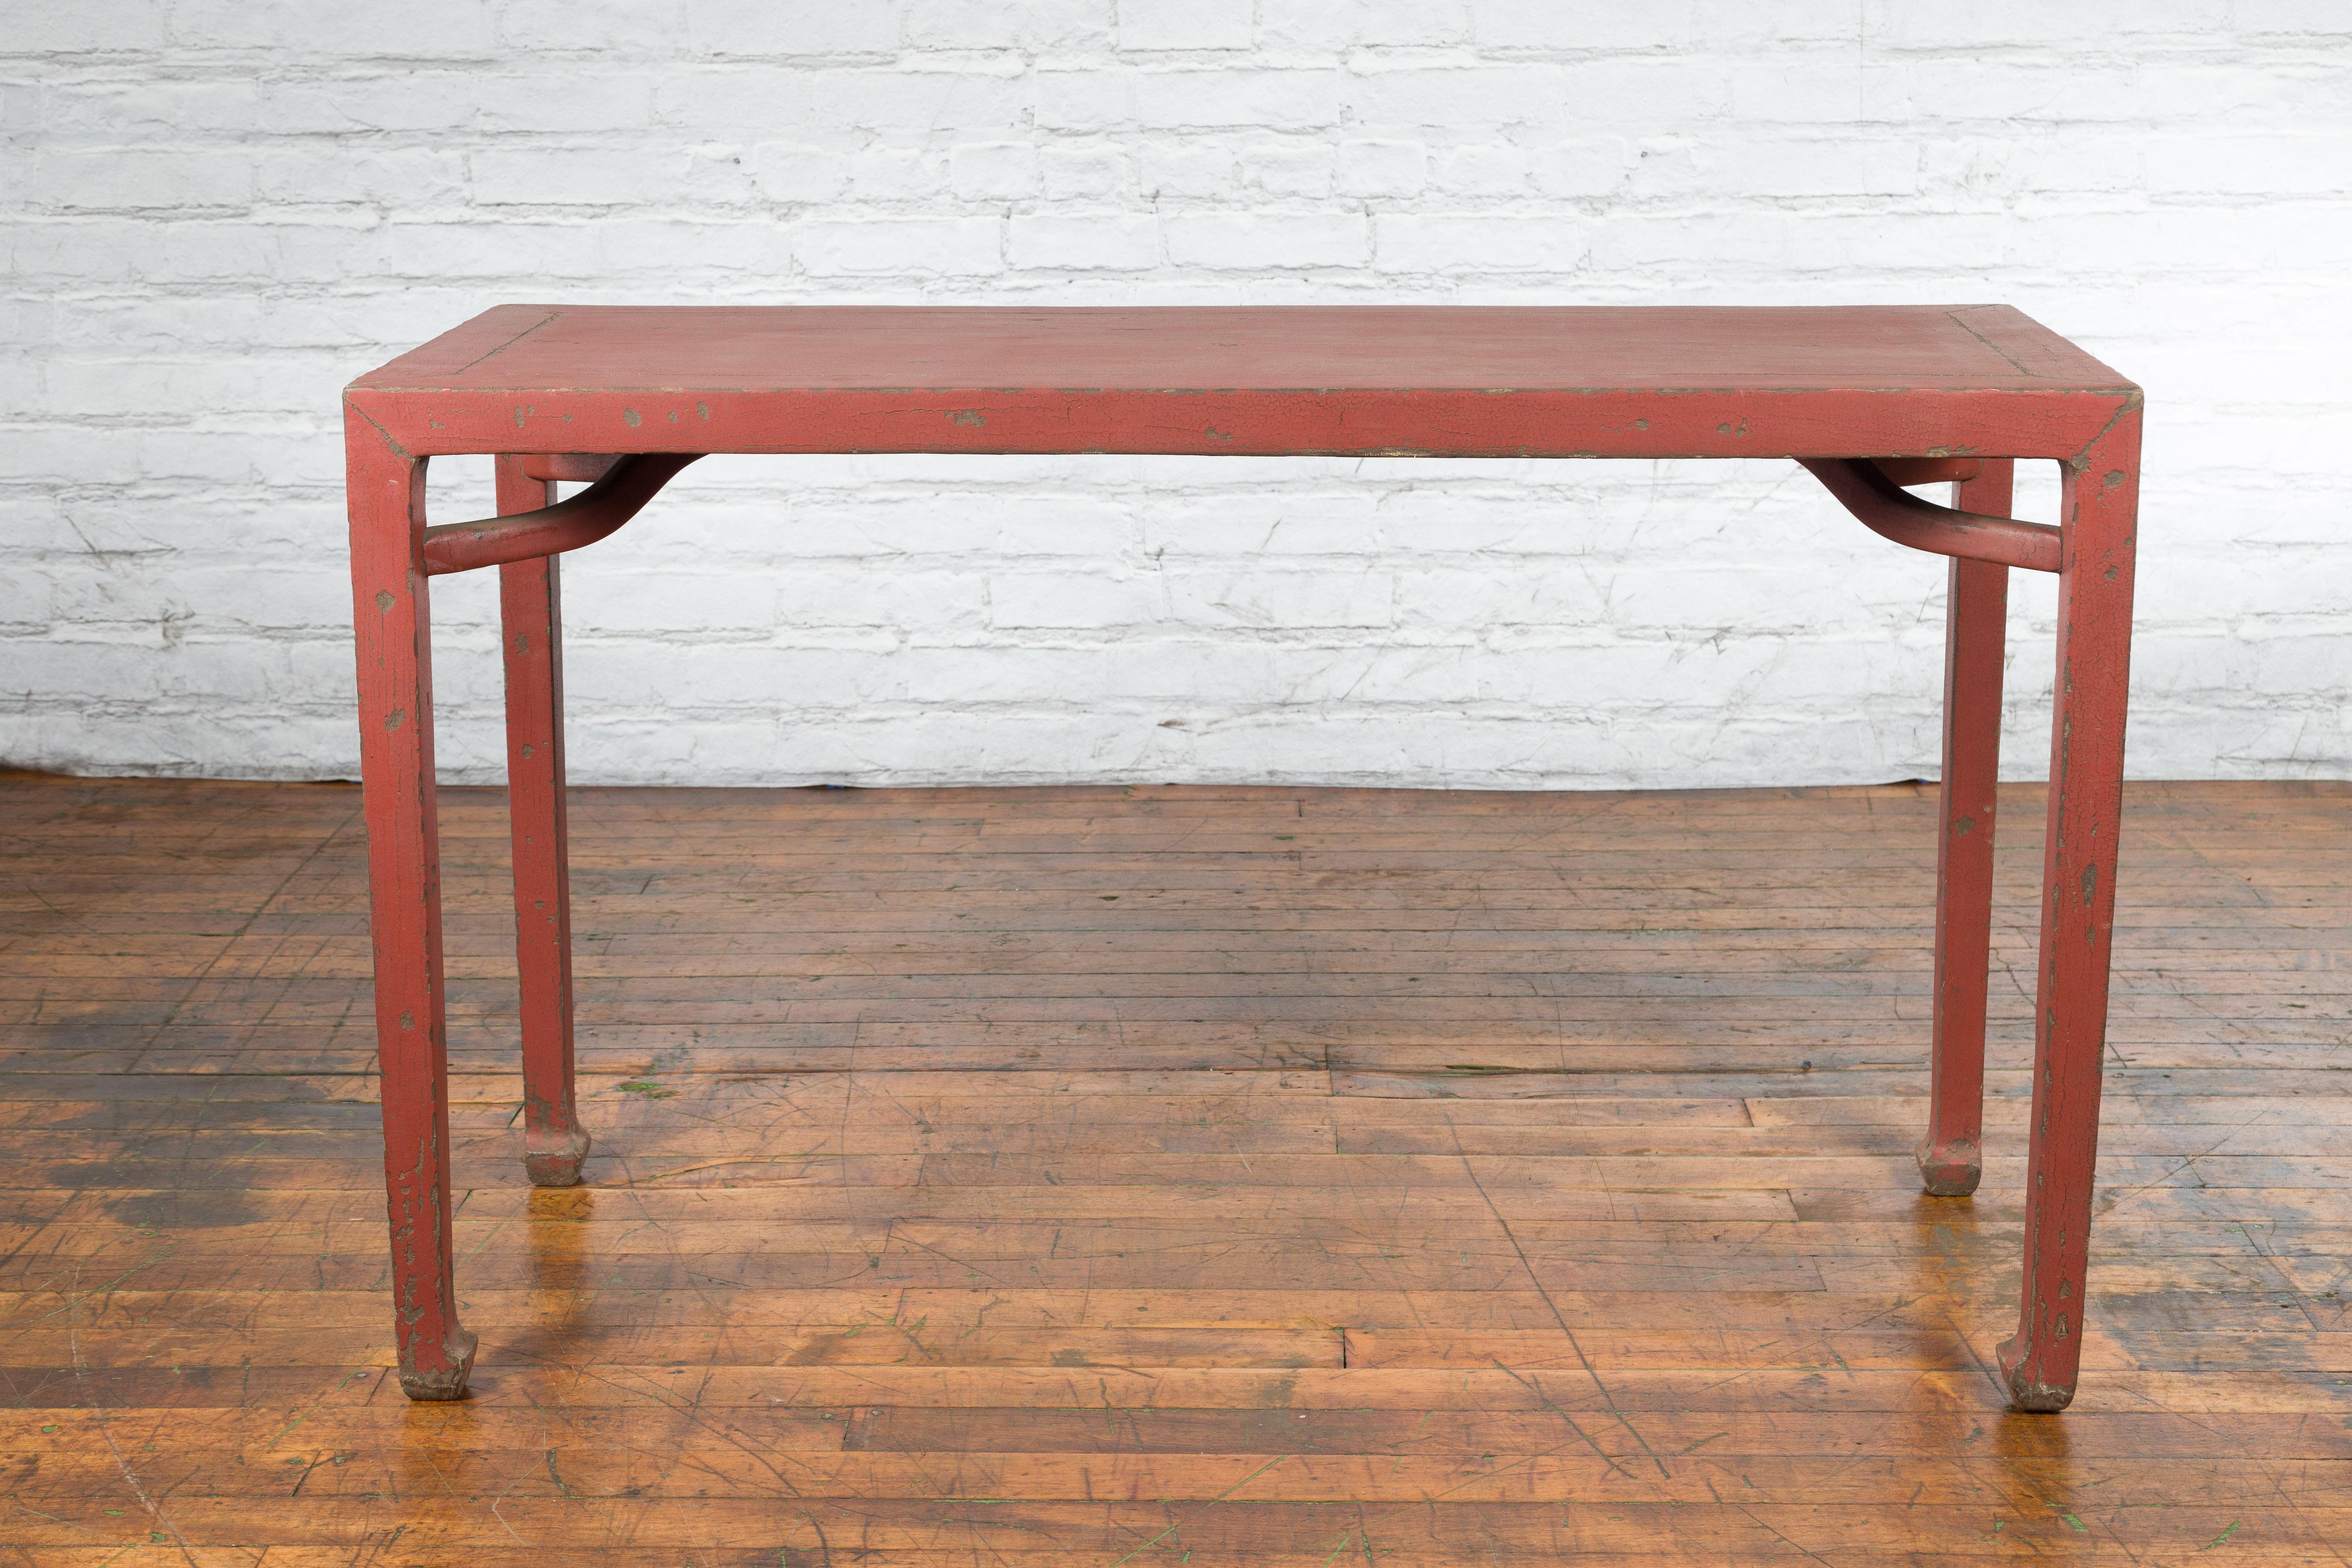 Chinese Qing Dynasty 19th Century Yumu Wood Wine Table with Original Red Lacquer In Good Condition For Sale In Yonkers, NY